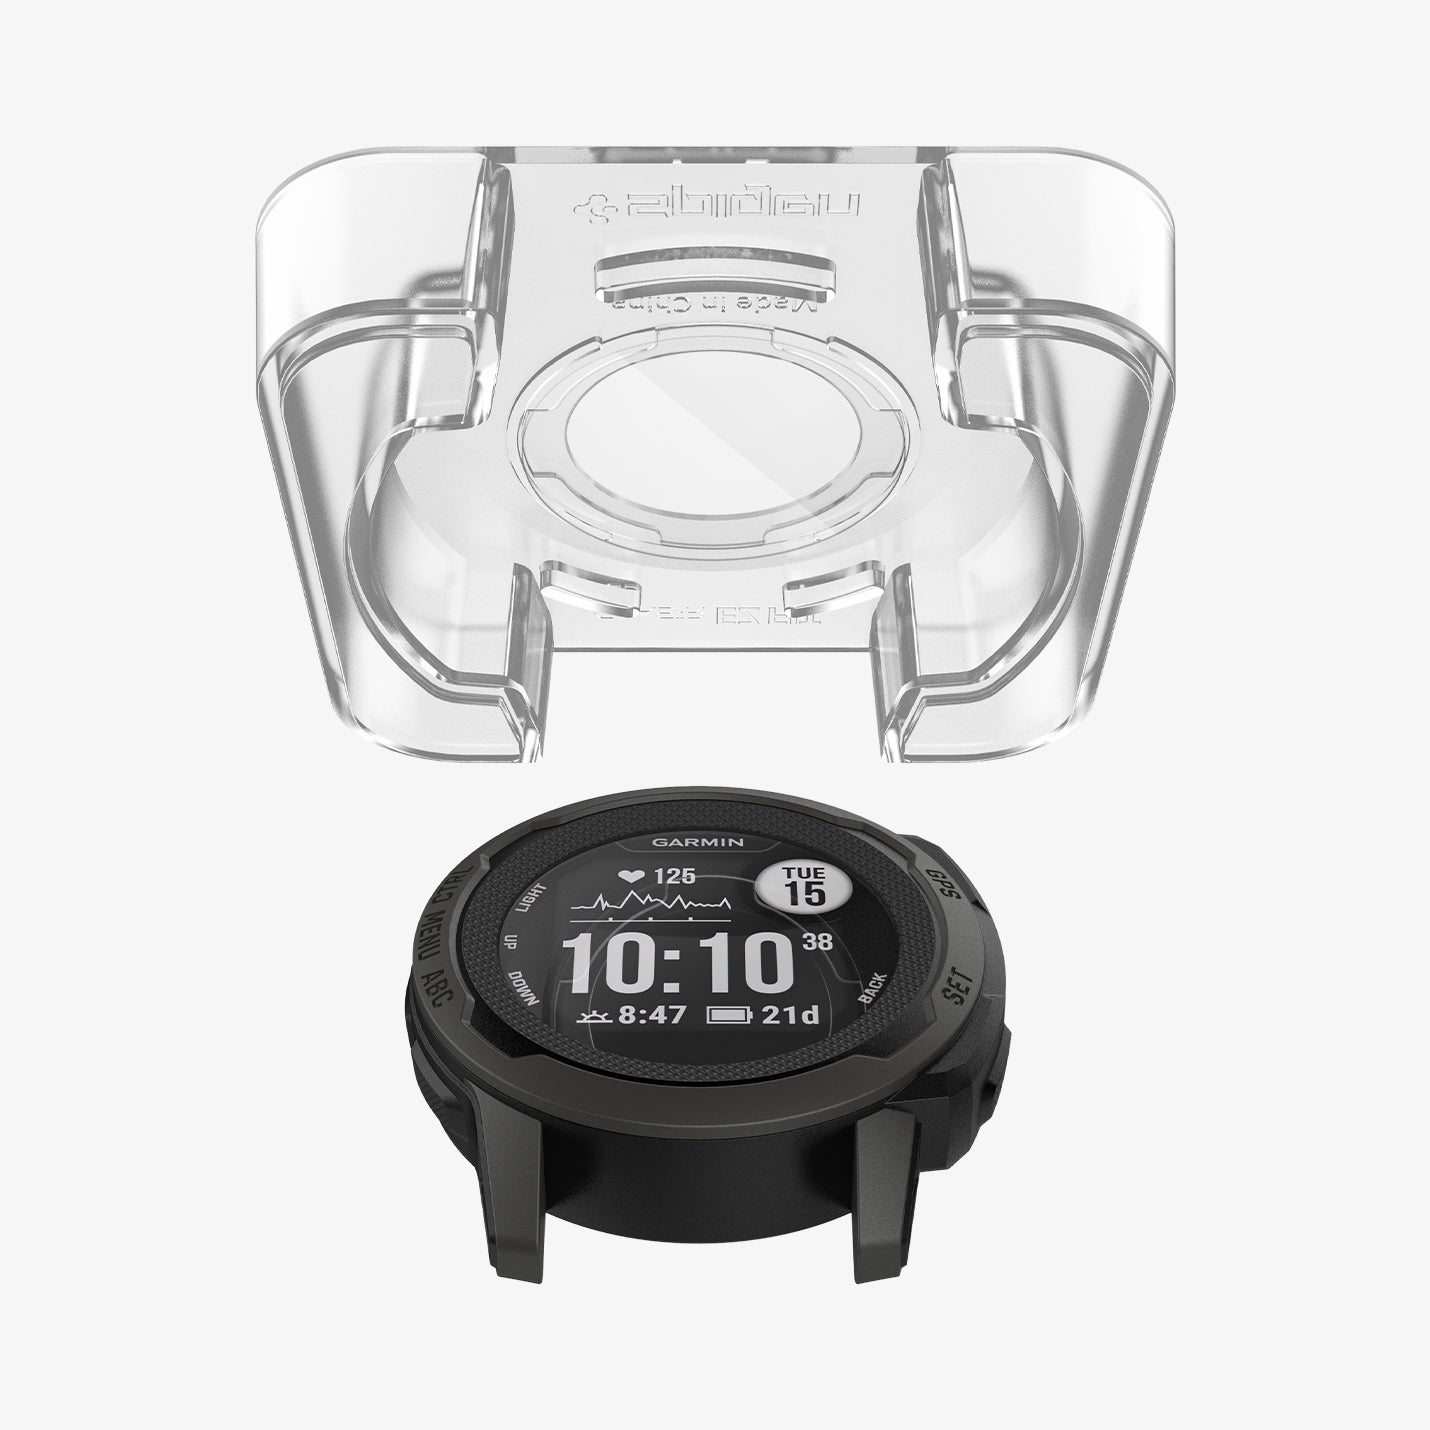 AGL04797 - Garmin Instinct 2 Screen Protector EZ FIT Glas.tR showing the ez fit tray hovering above the watch face